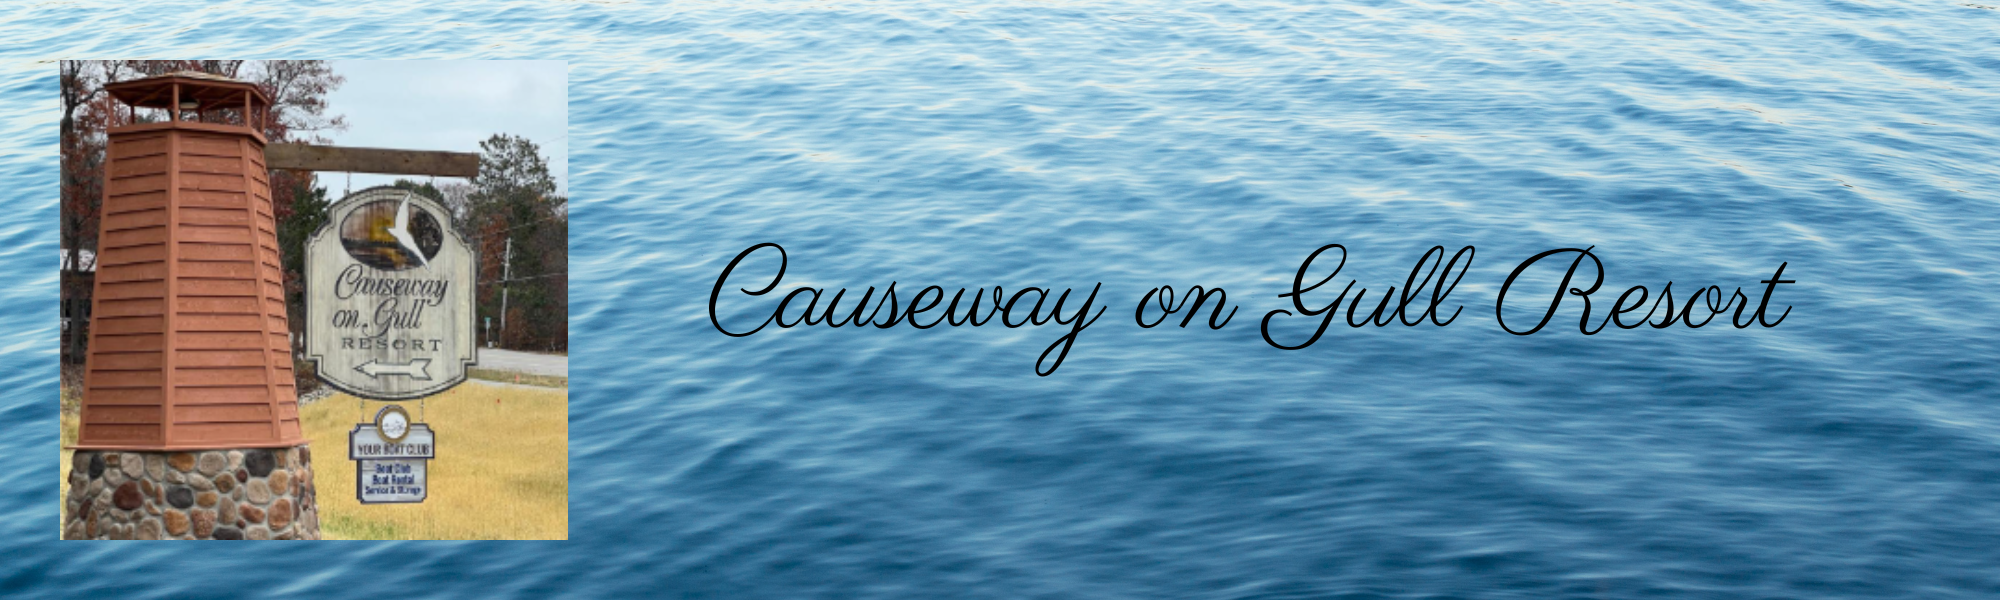 Causeway on Gull Resort sign with water background